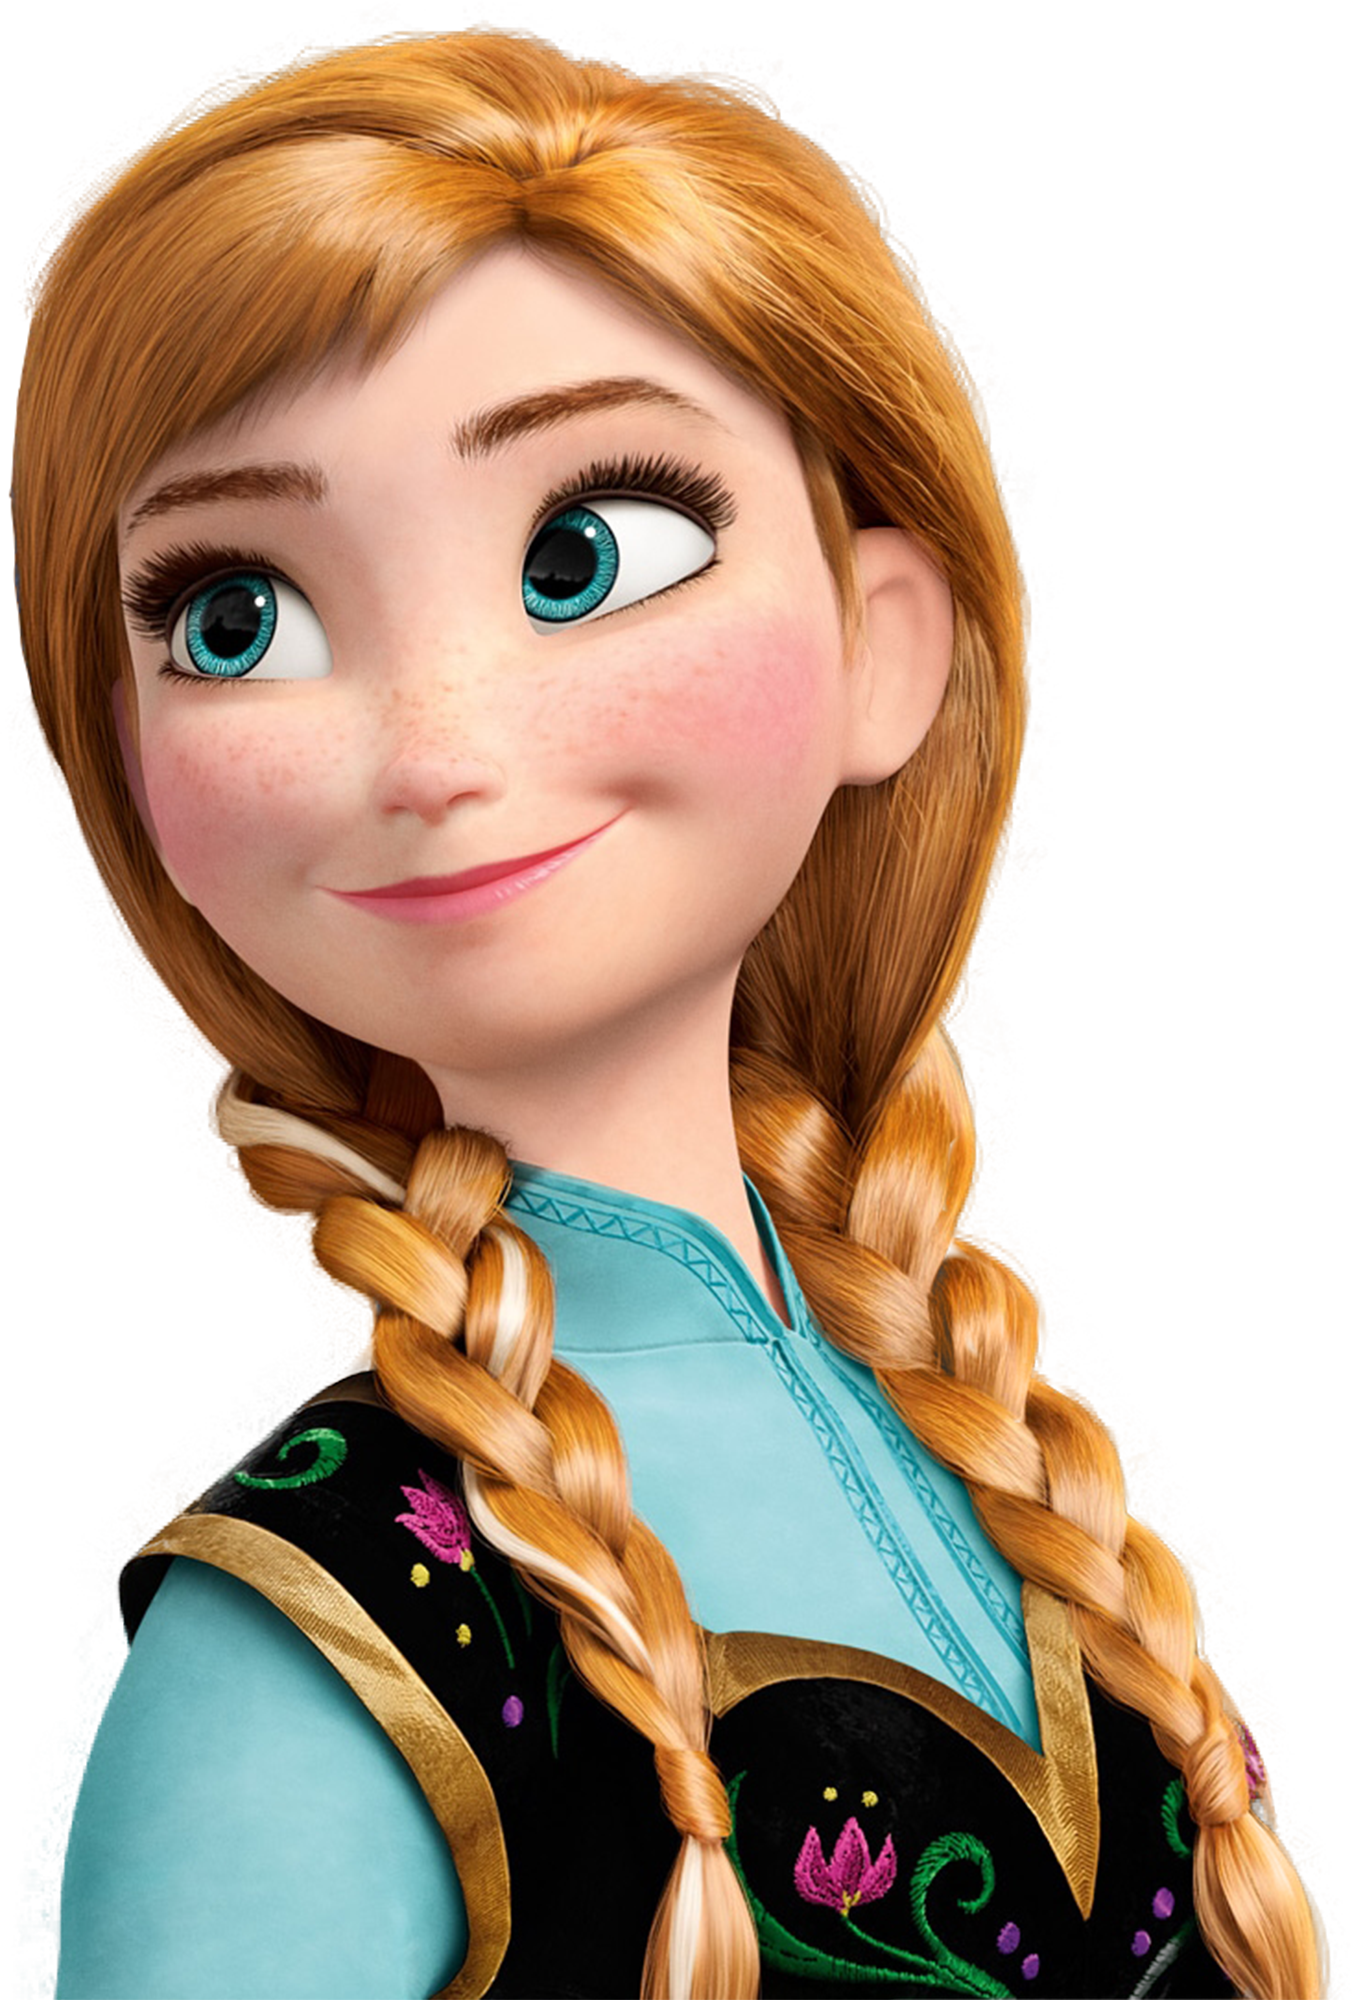 Download Anna Picture HQ PNG Image | FreePNGImg